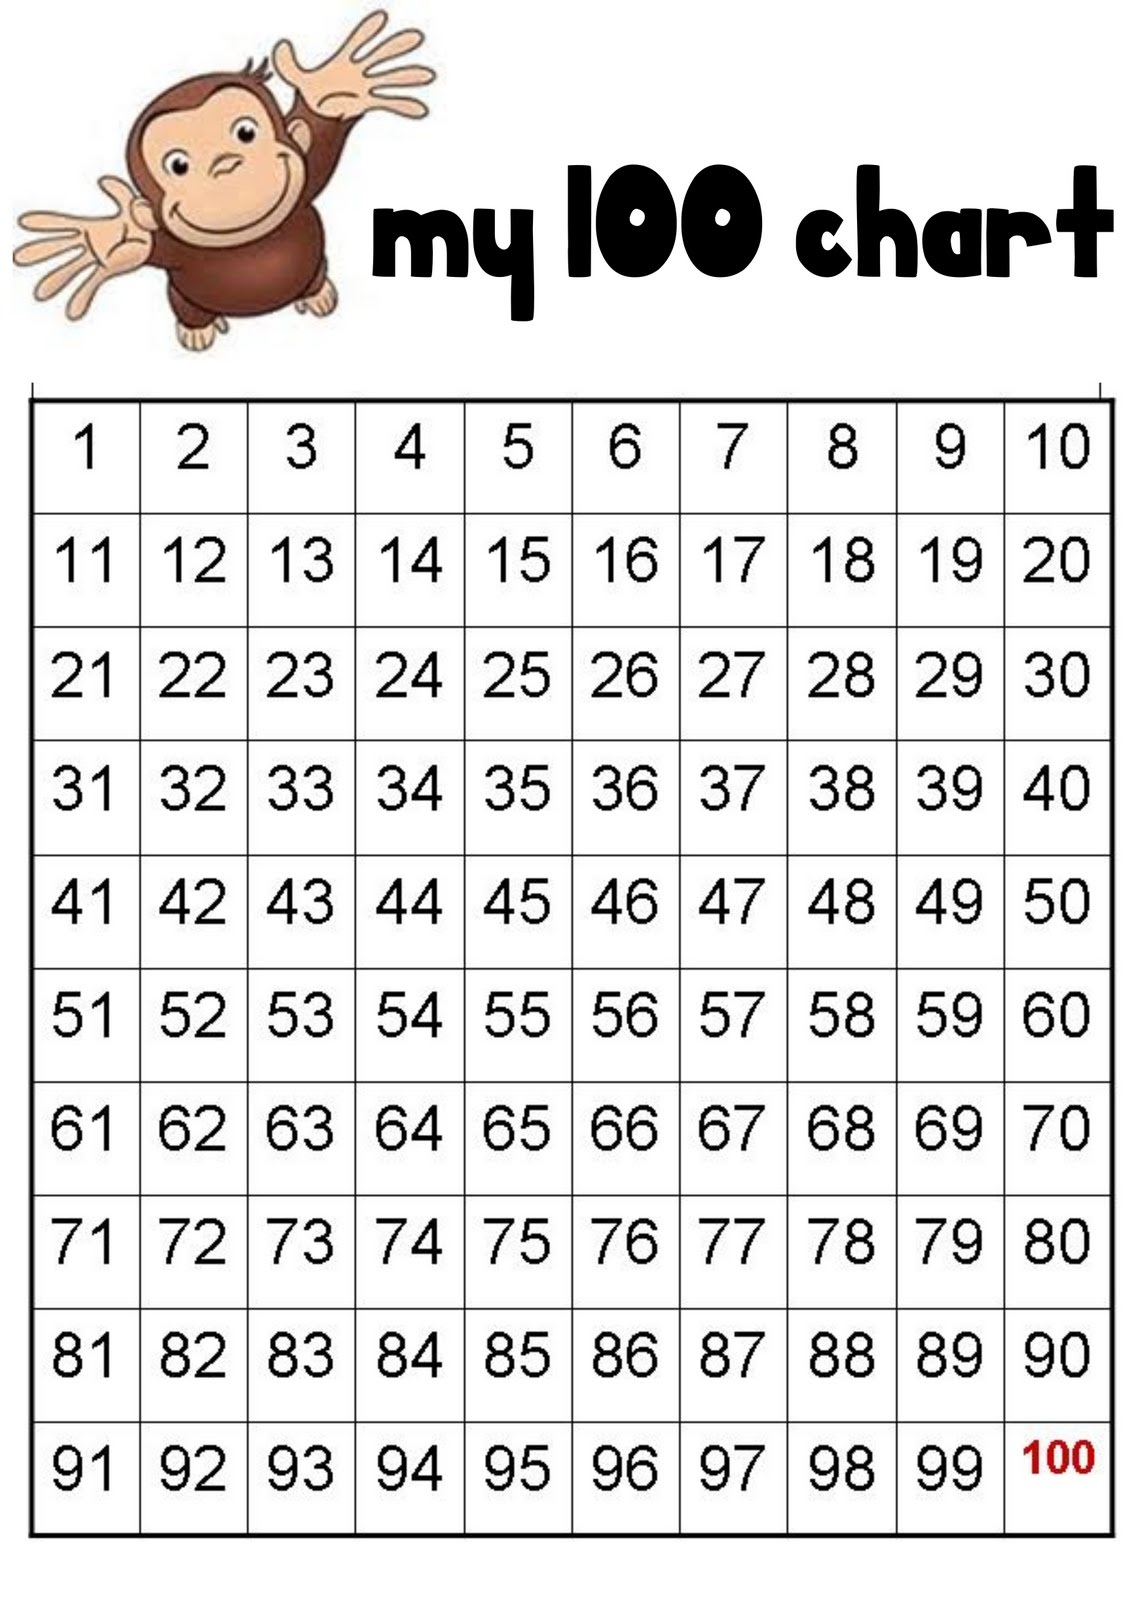 100 number chart